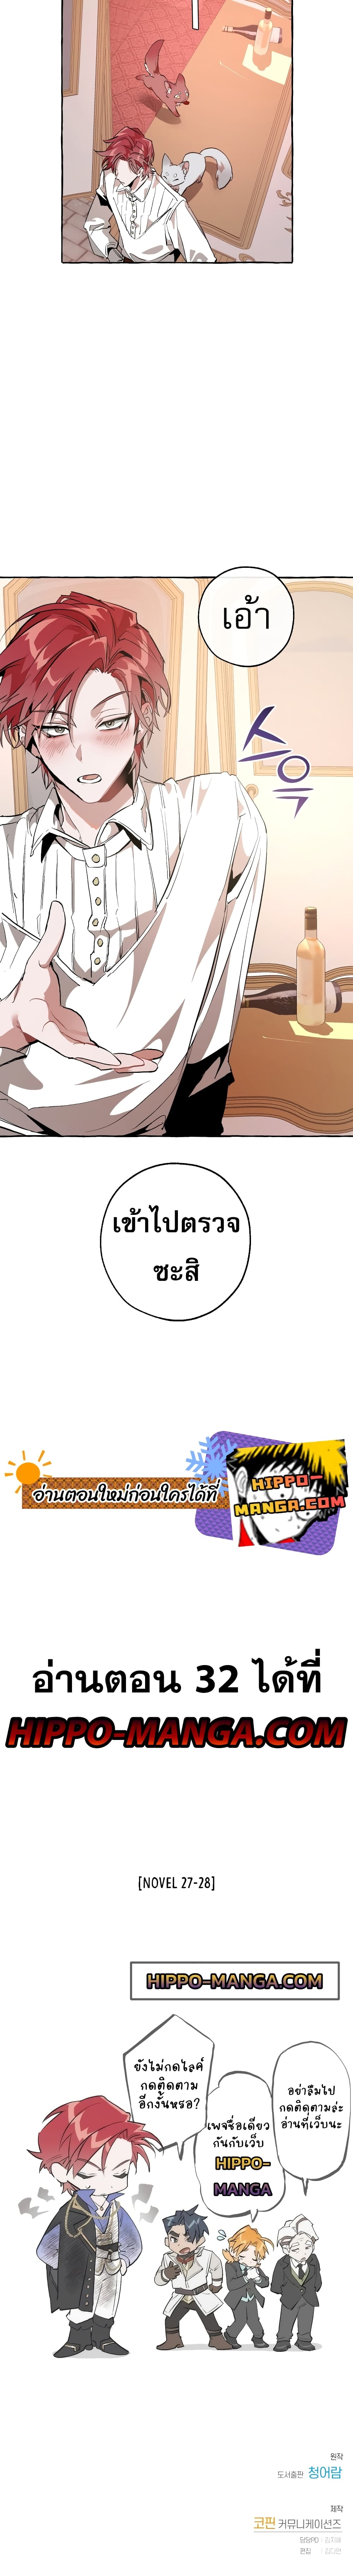 Trash Of The Counts Family 31 แปลไทย